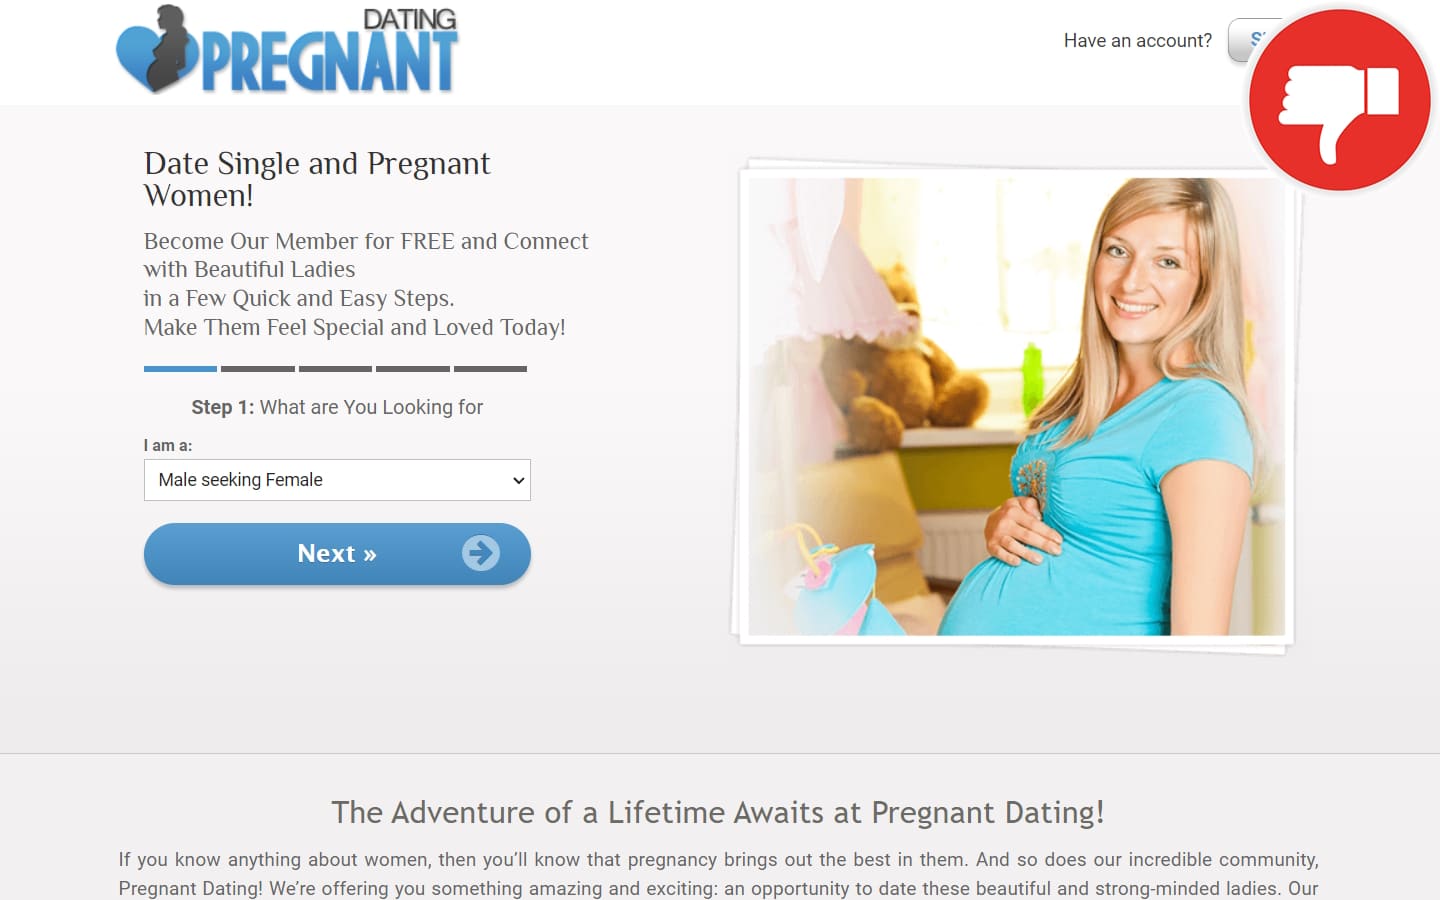 Review PregnantDating.com scam experience